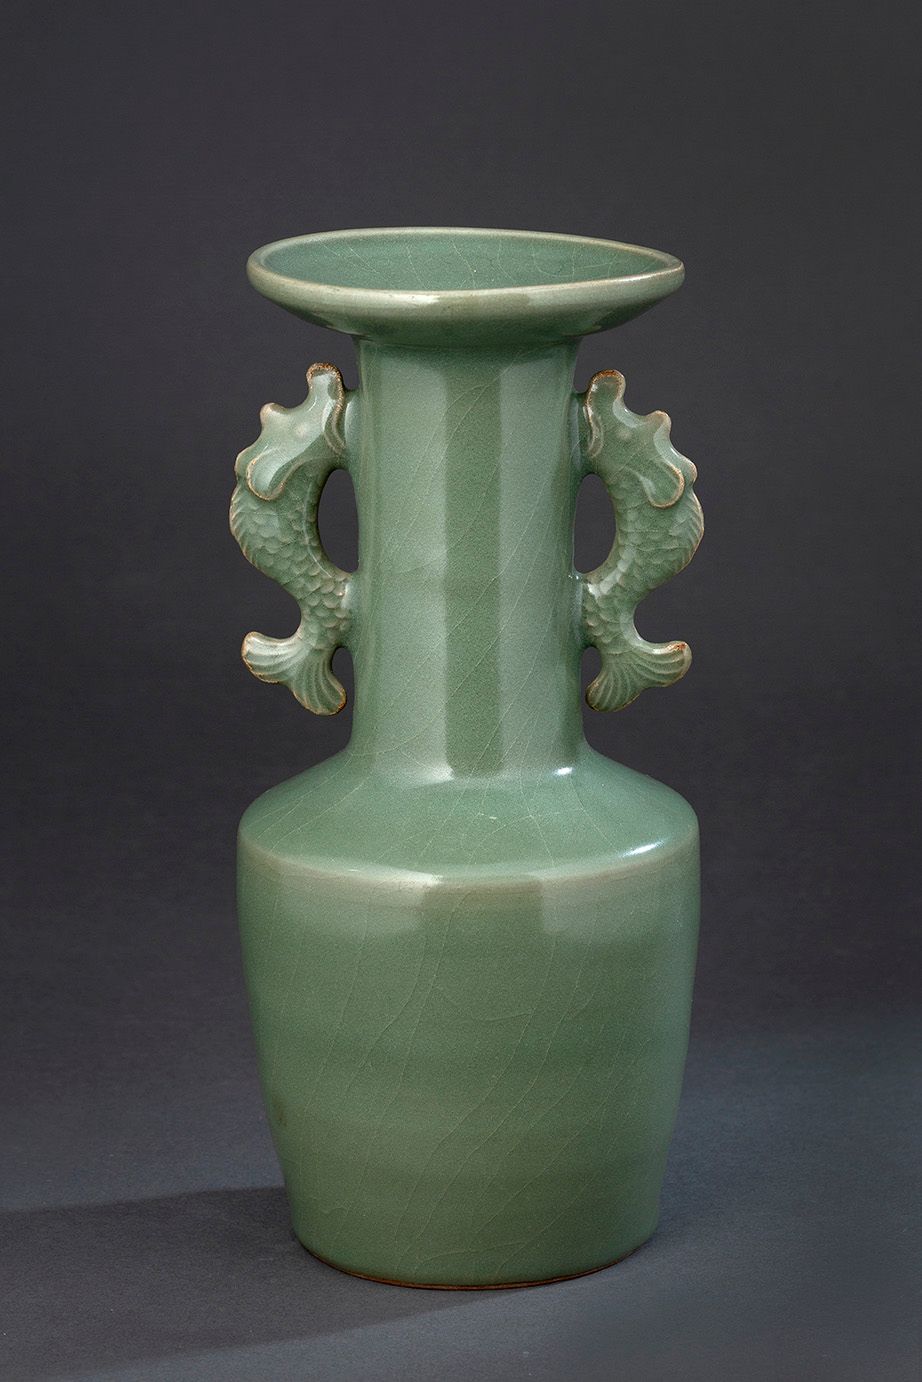 CHINE, FOURS DE LONGQUAN XIIIe SIÈCLE = Mallet-shaped vase
In celadon stoneware,&hellip;